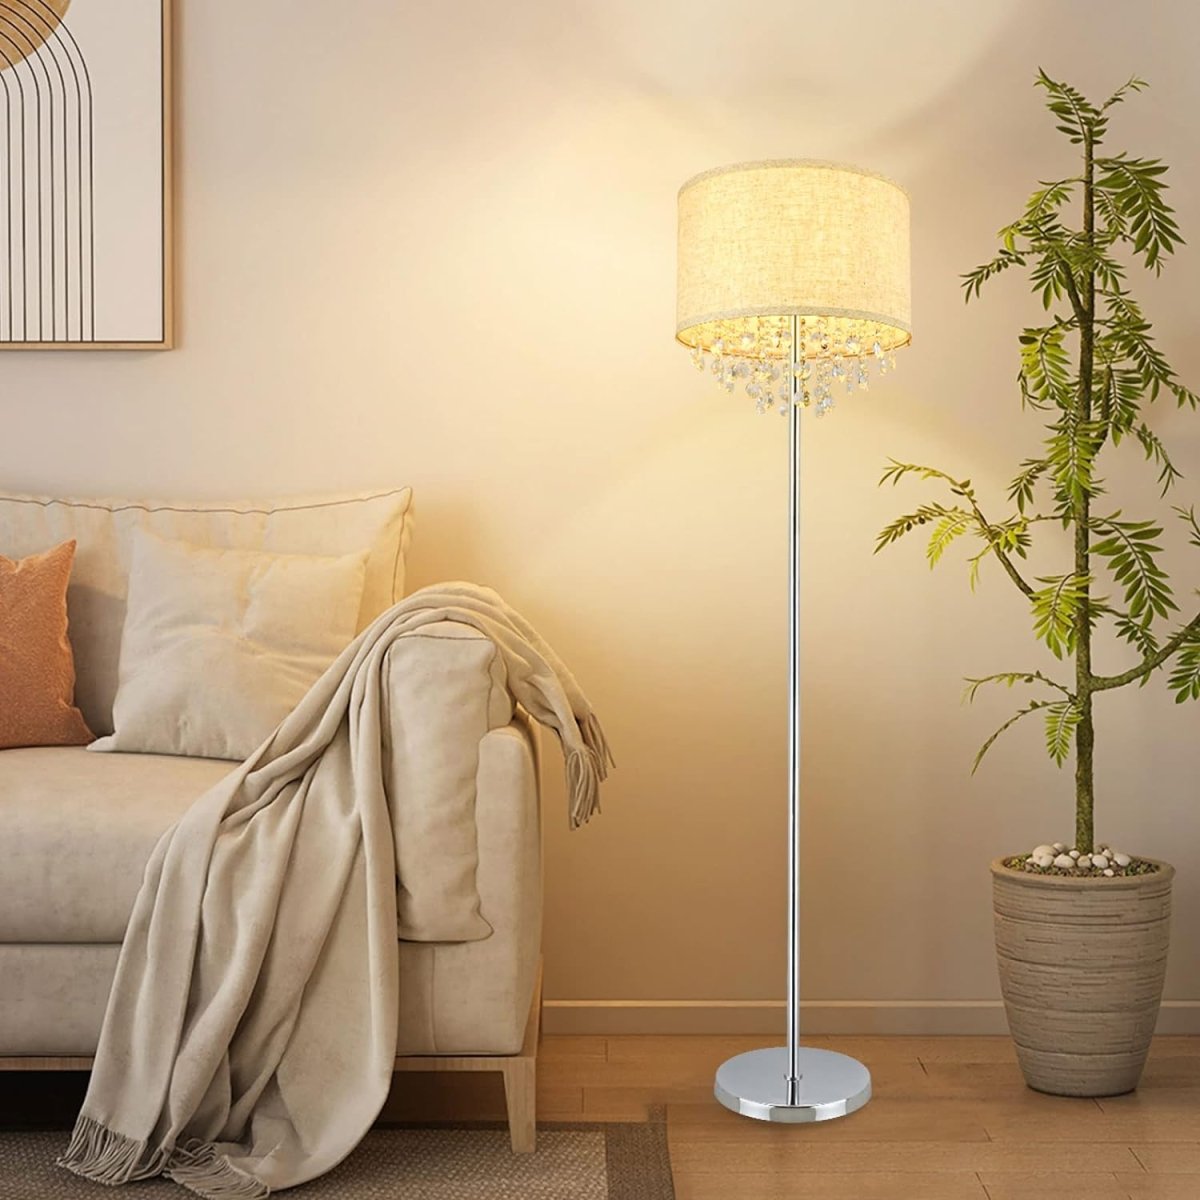 DLLT Crystal Floor Lamp for Living Room Modern Standing Lamp for Bedroom, Chrome Finish, 64” Tall Pole LED Floor Lamp, 9W LED Bulb Included, Fabric Shade, Silver - PY-F1032S 1 | DEPULEY